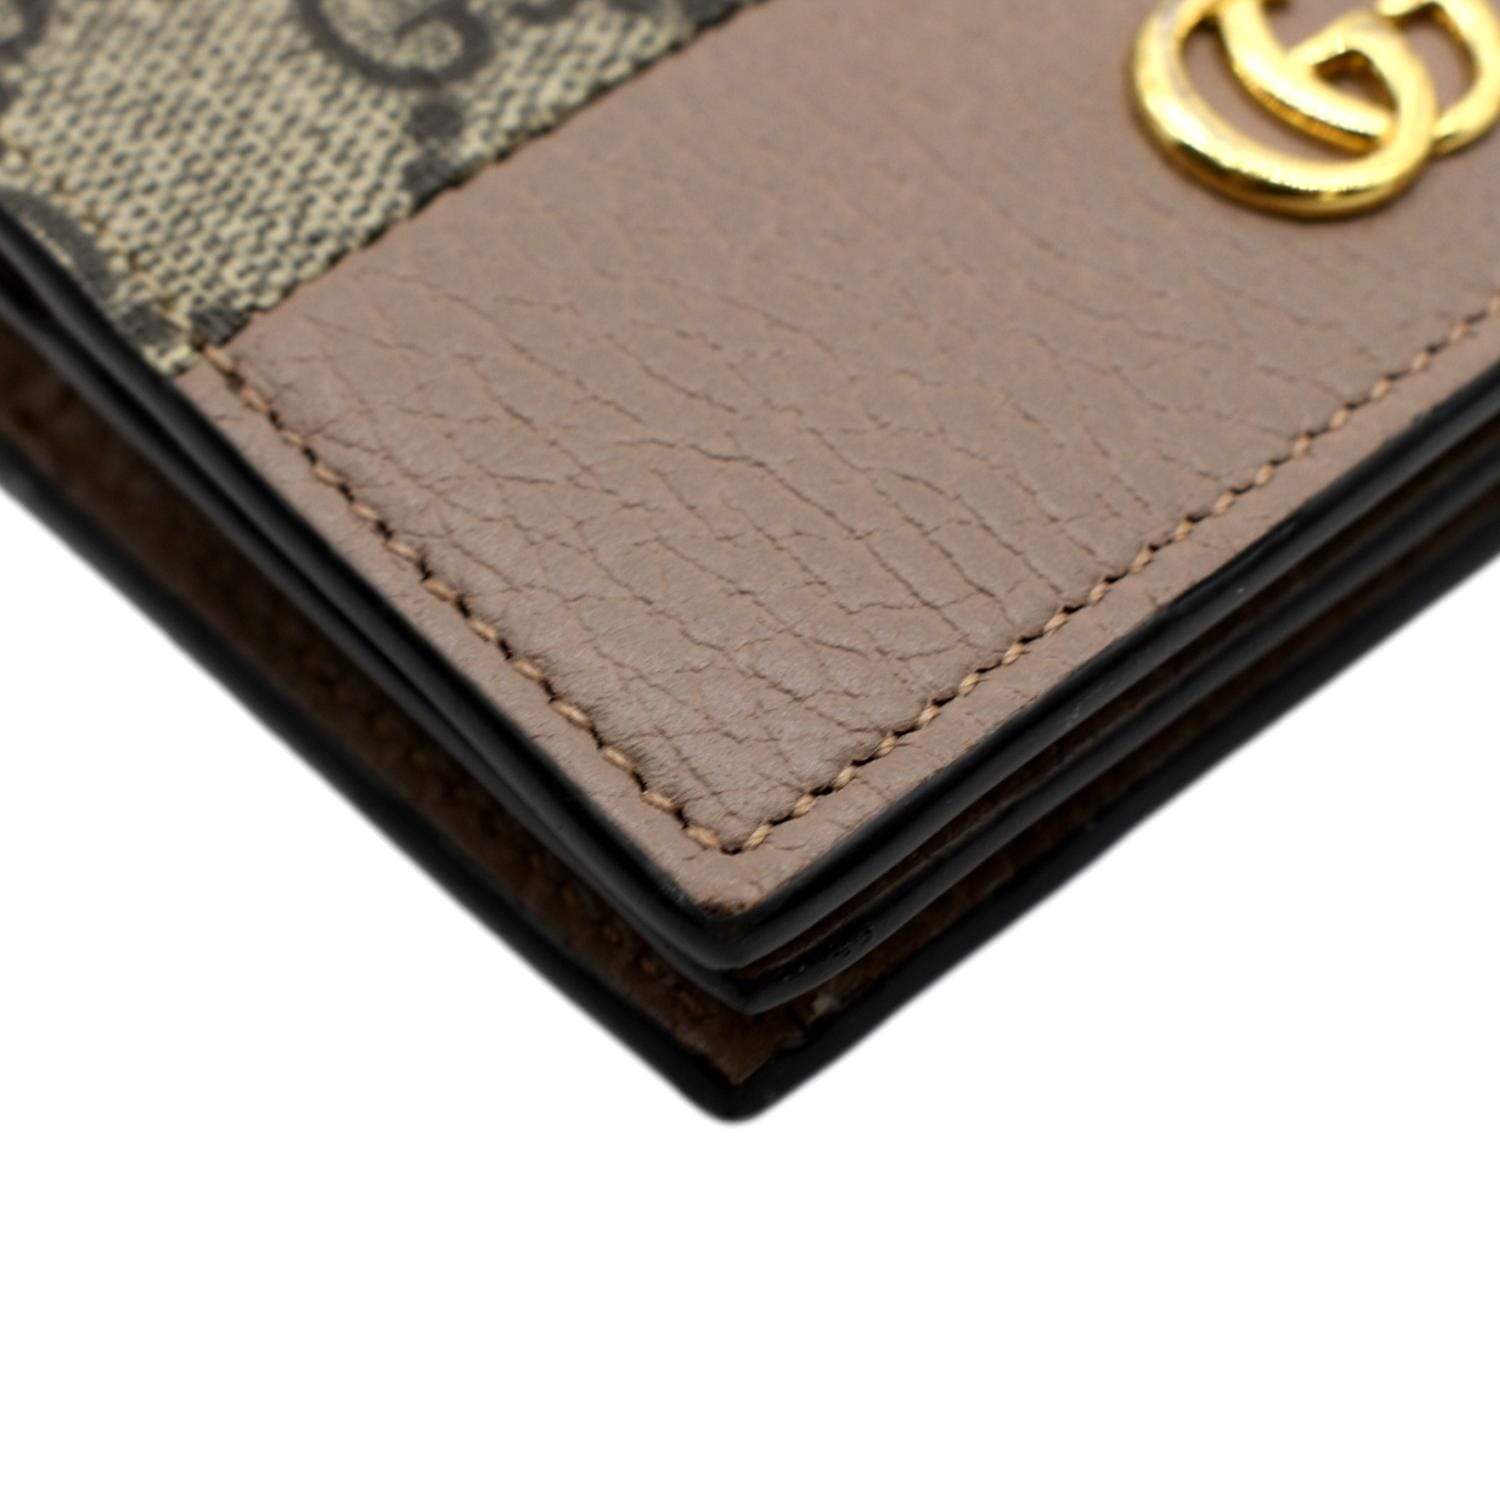 Gucci Marmont GG Canvas Leather Card Case Wallet